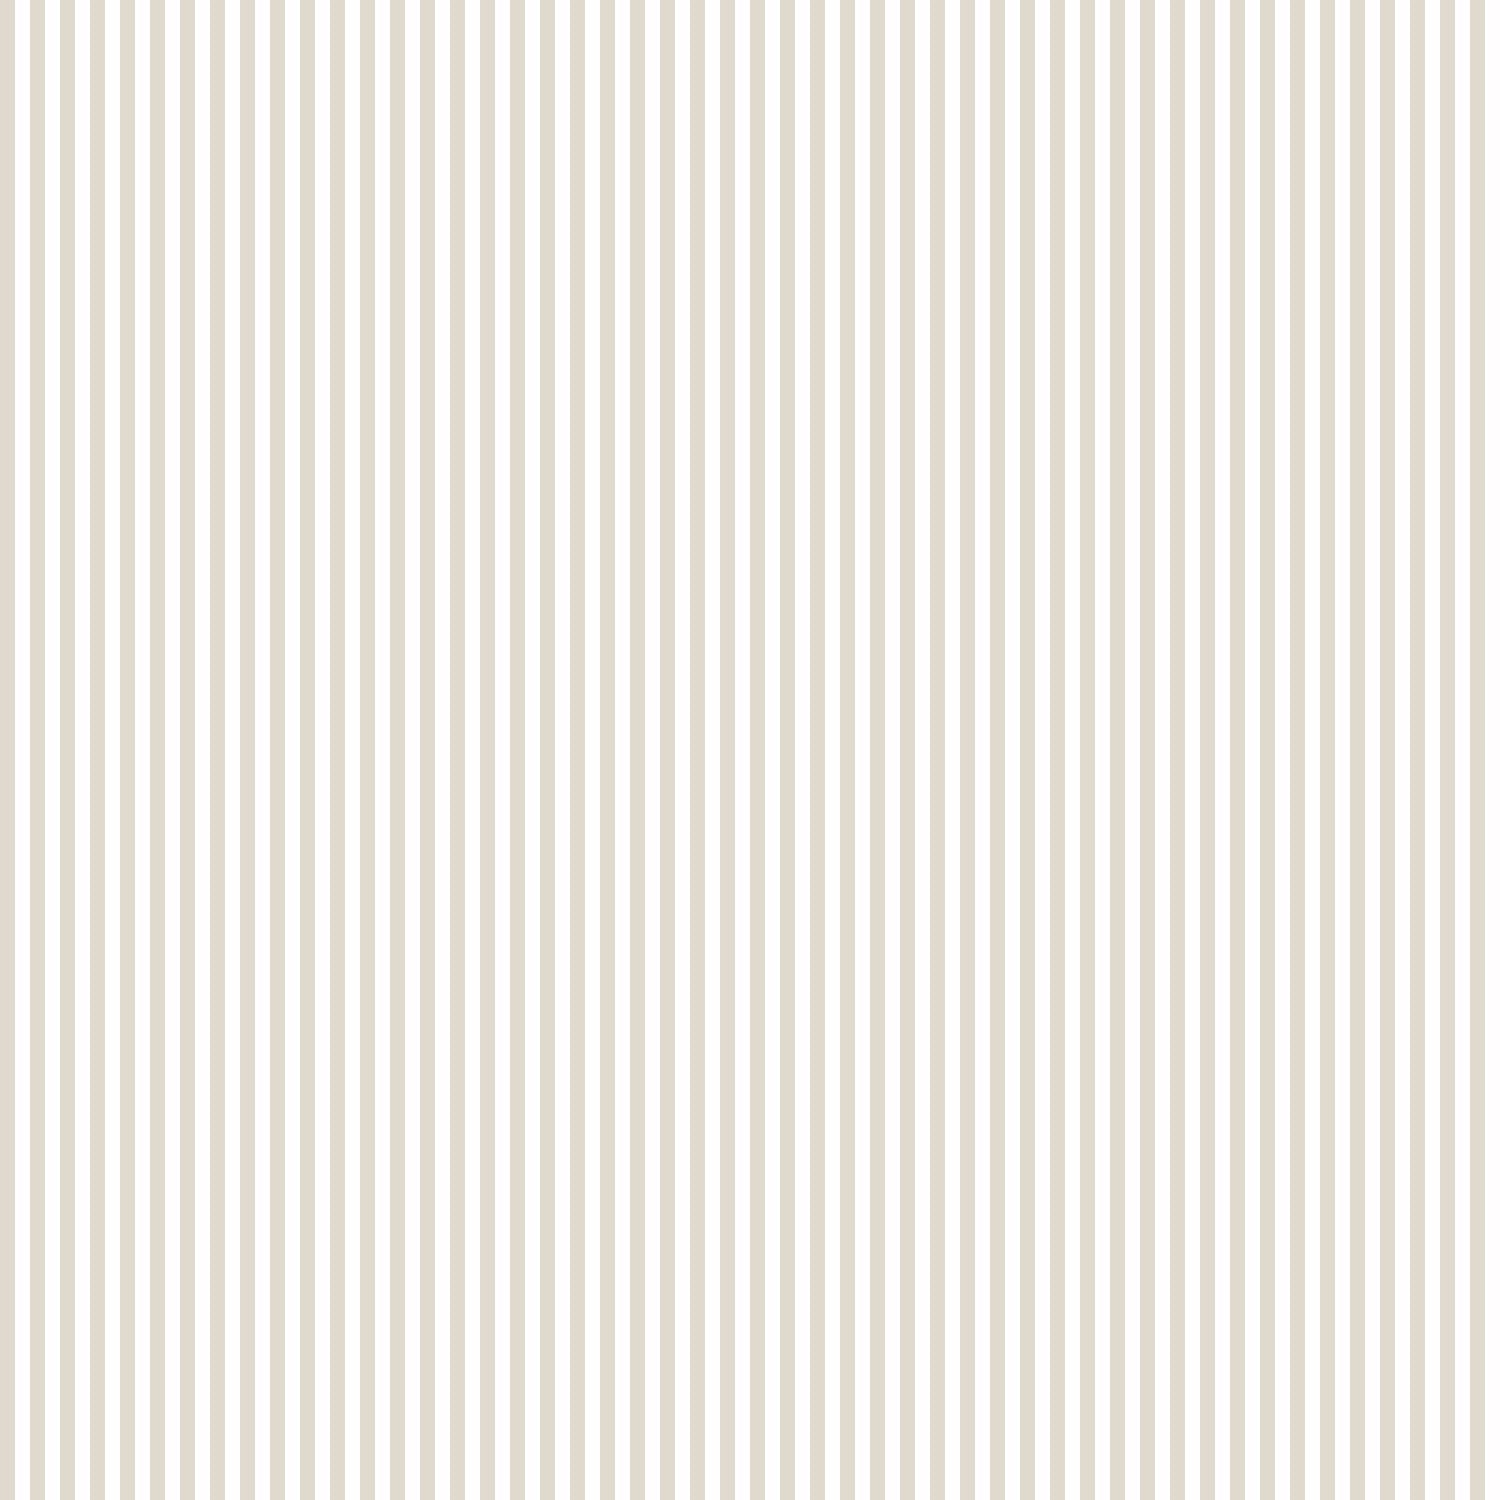 A detailed view of the Anne Stripe Wallpaper - Mini showcasing its subtle vertical stripe pattern in warm beige tones. The design adds a touch of simplicity and elegance, perfect for any modern interior